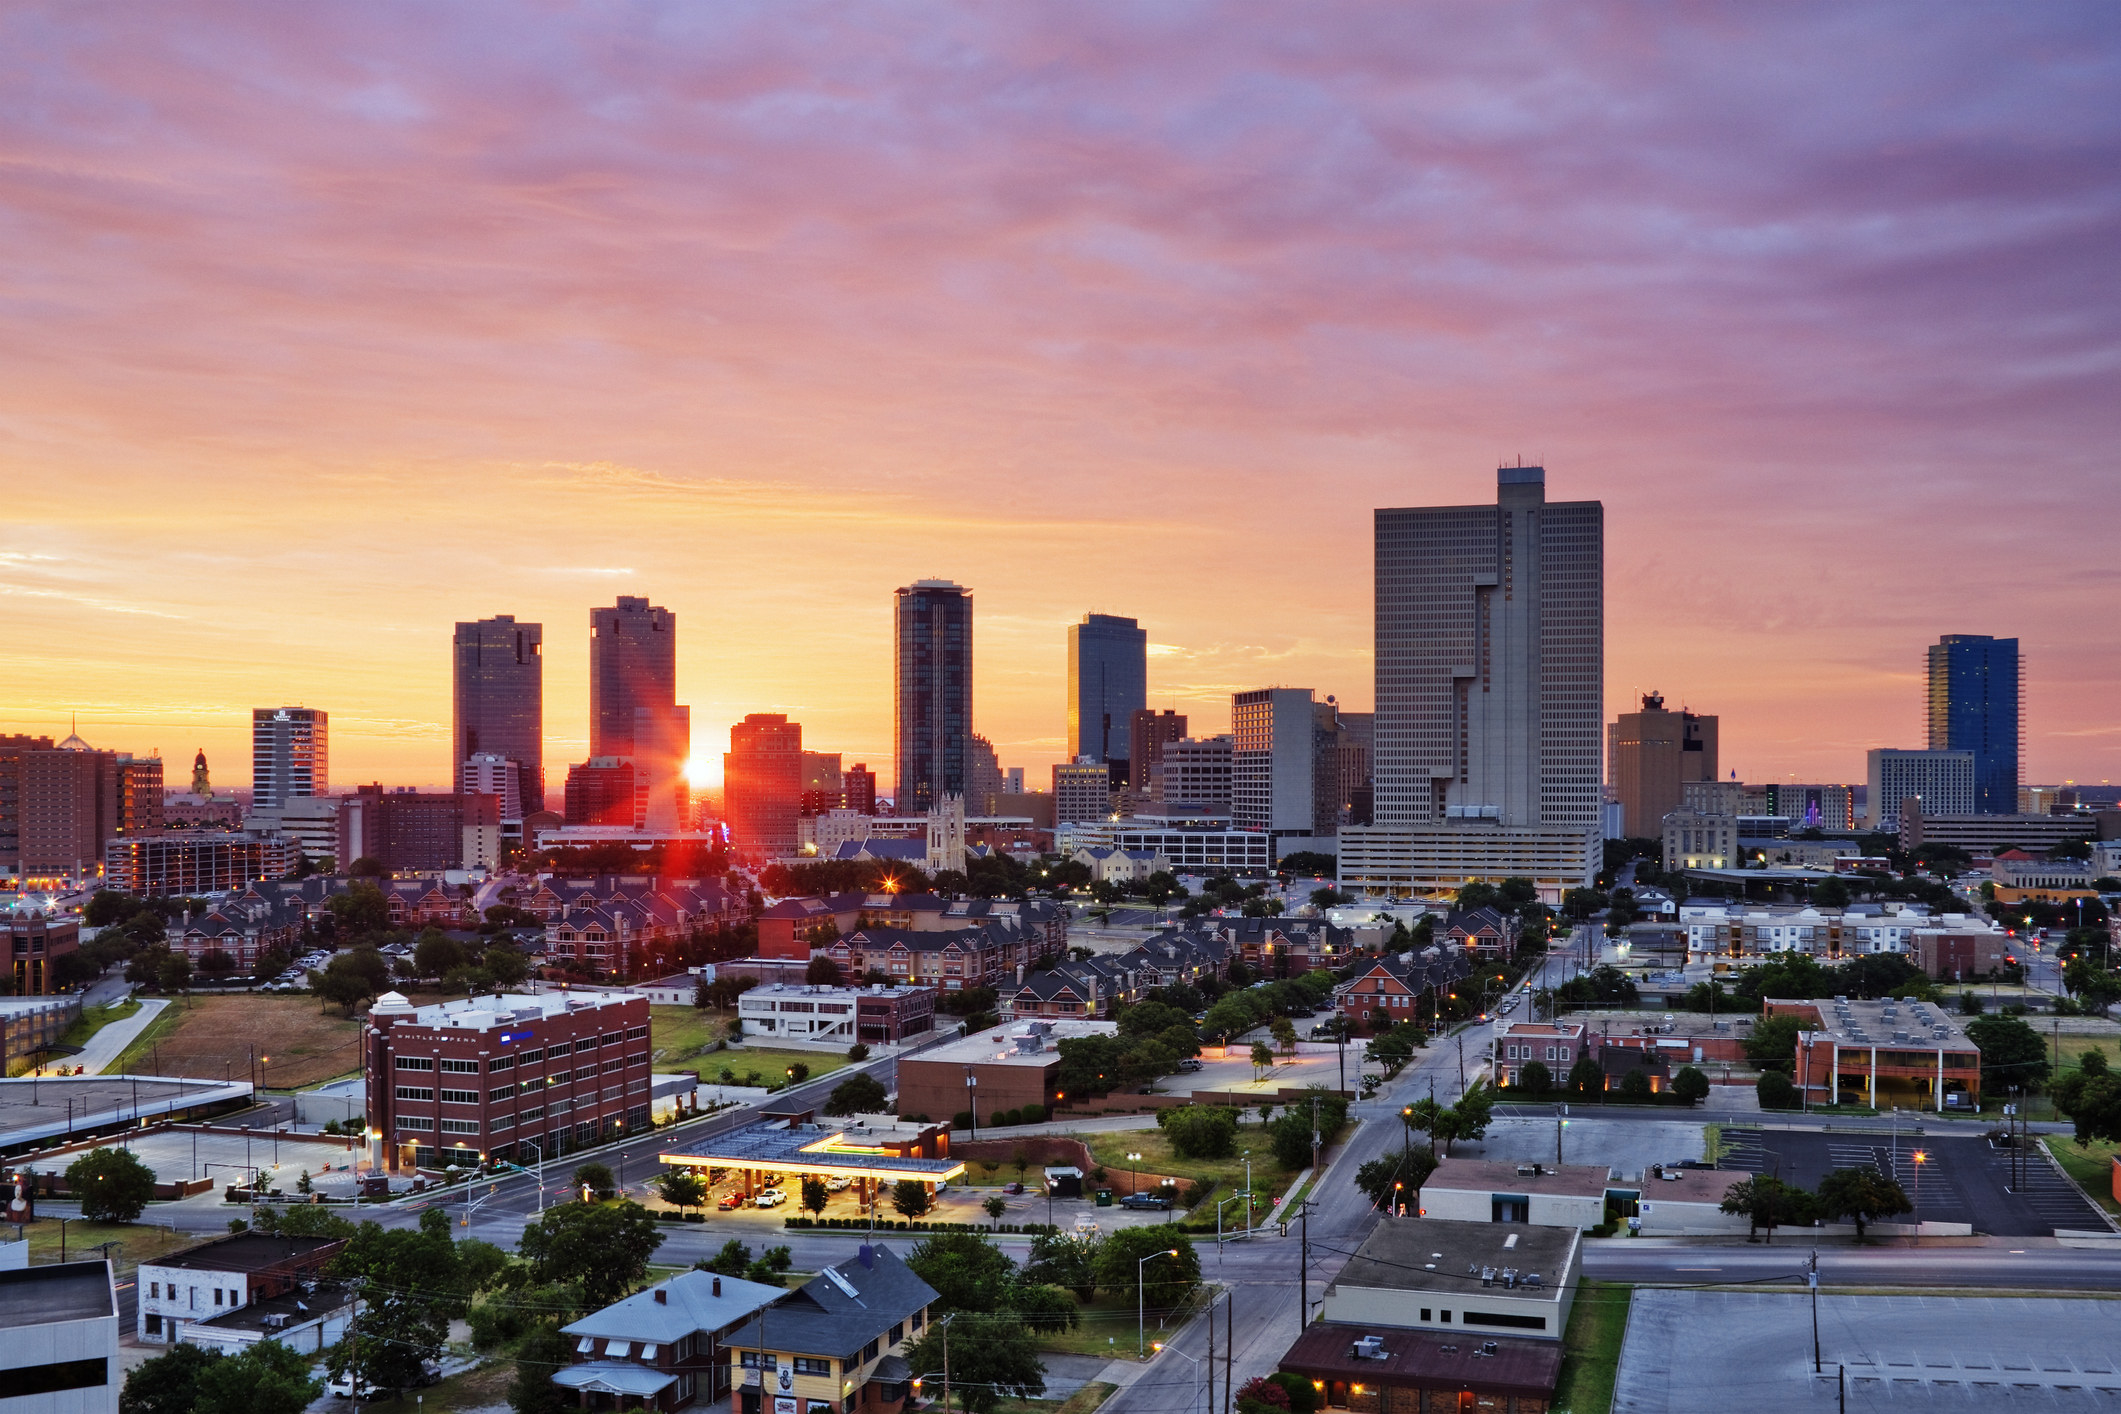 Sun rising through buildings in the Fort Worth skyline